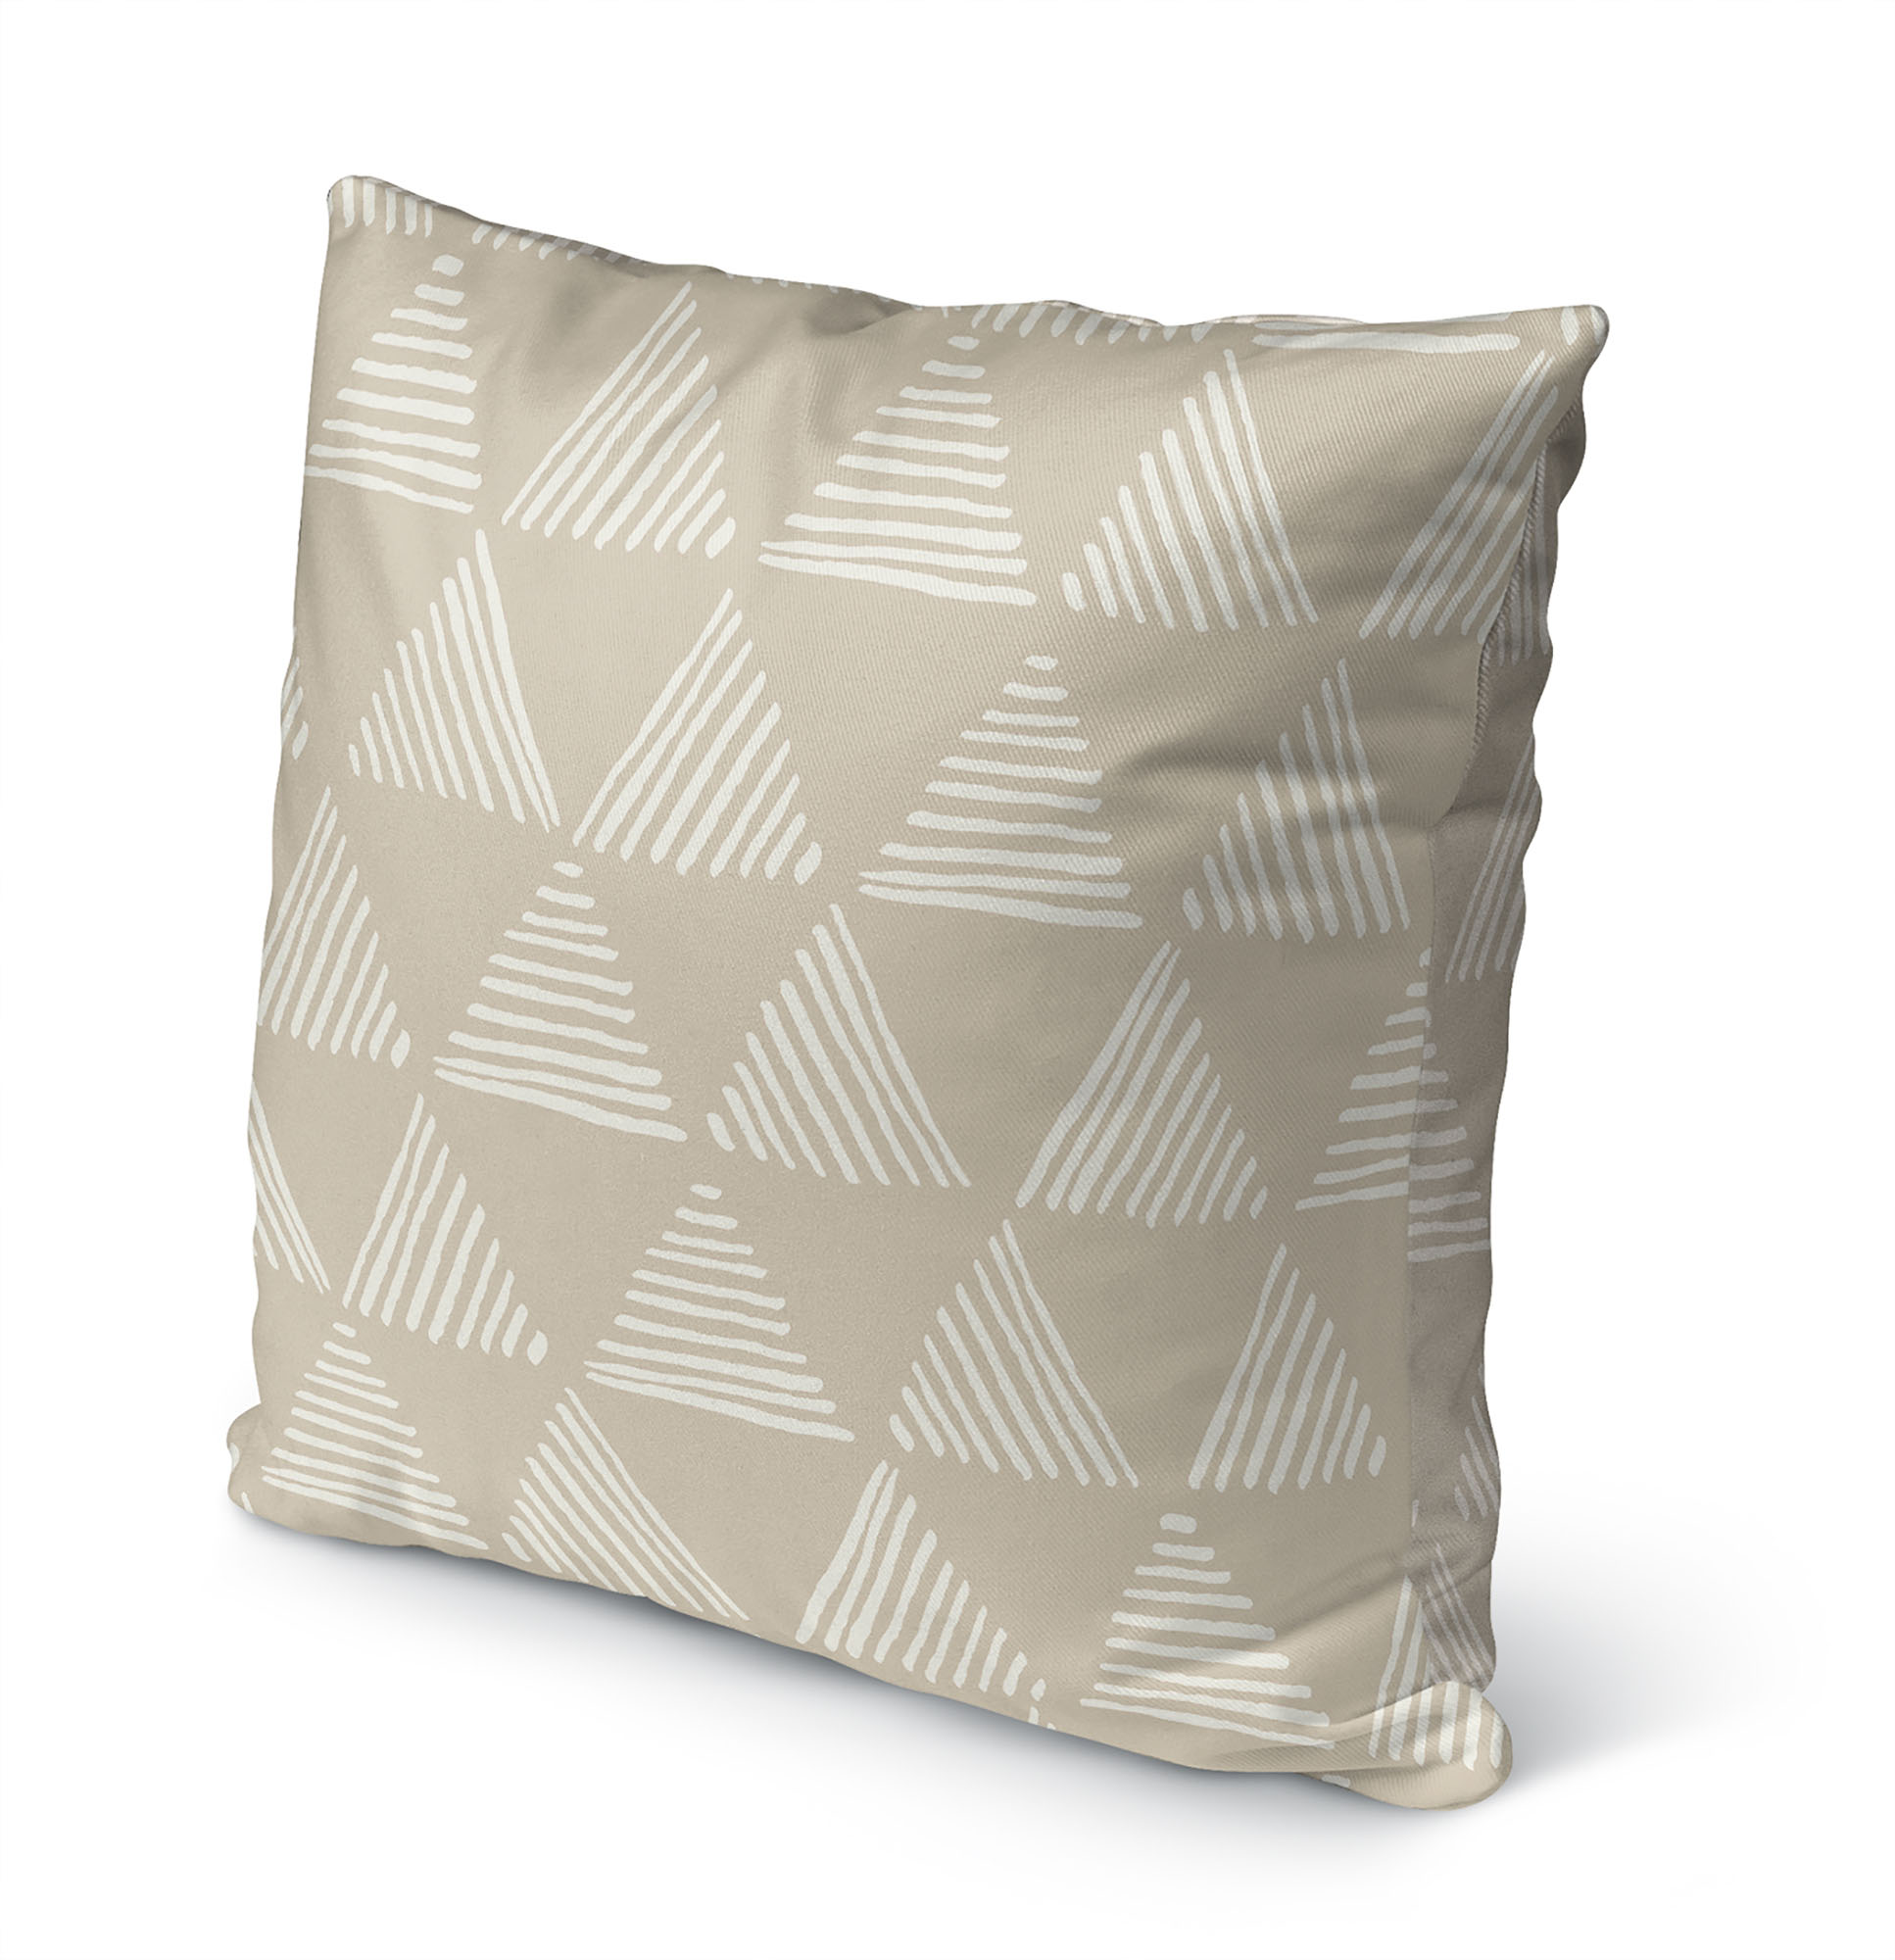 Triangular Prism Beige Outdoor Pillow by Kavka Designs - image 3 of 5